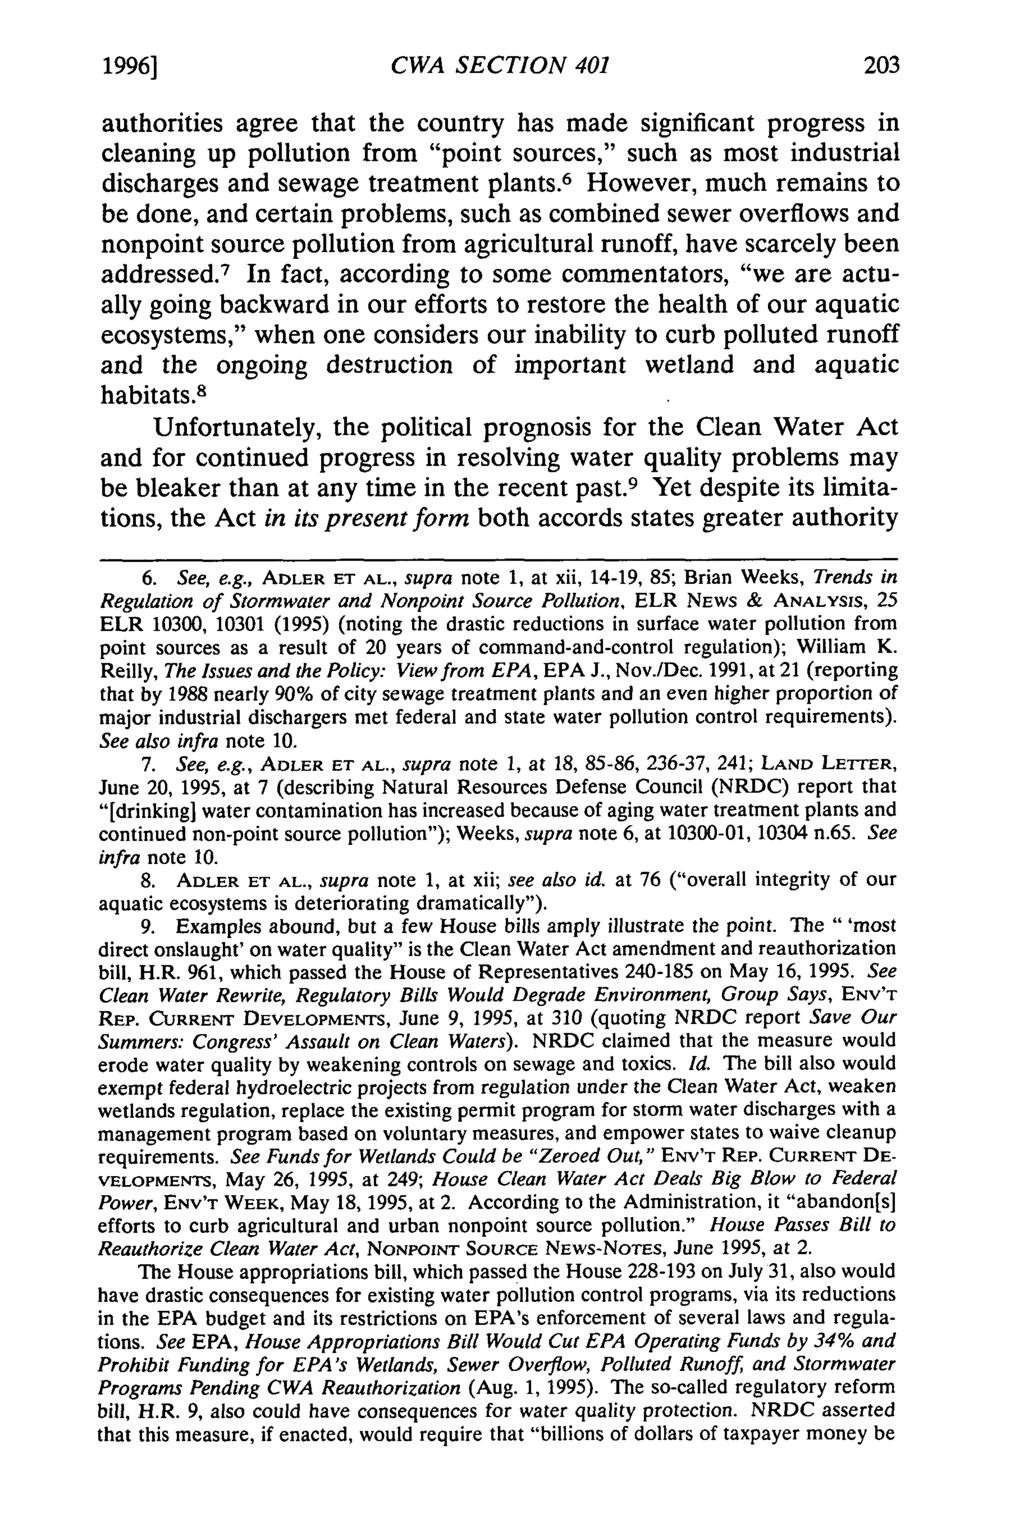 1996] CWA SECTION 401 authorities agree that the country has made significant progress in cleaning up pollution from "point sources," such as most industrial discharges and sewage treatment plants.